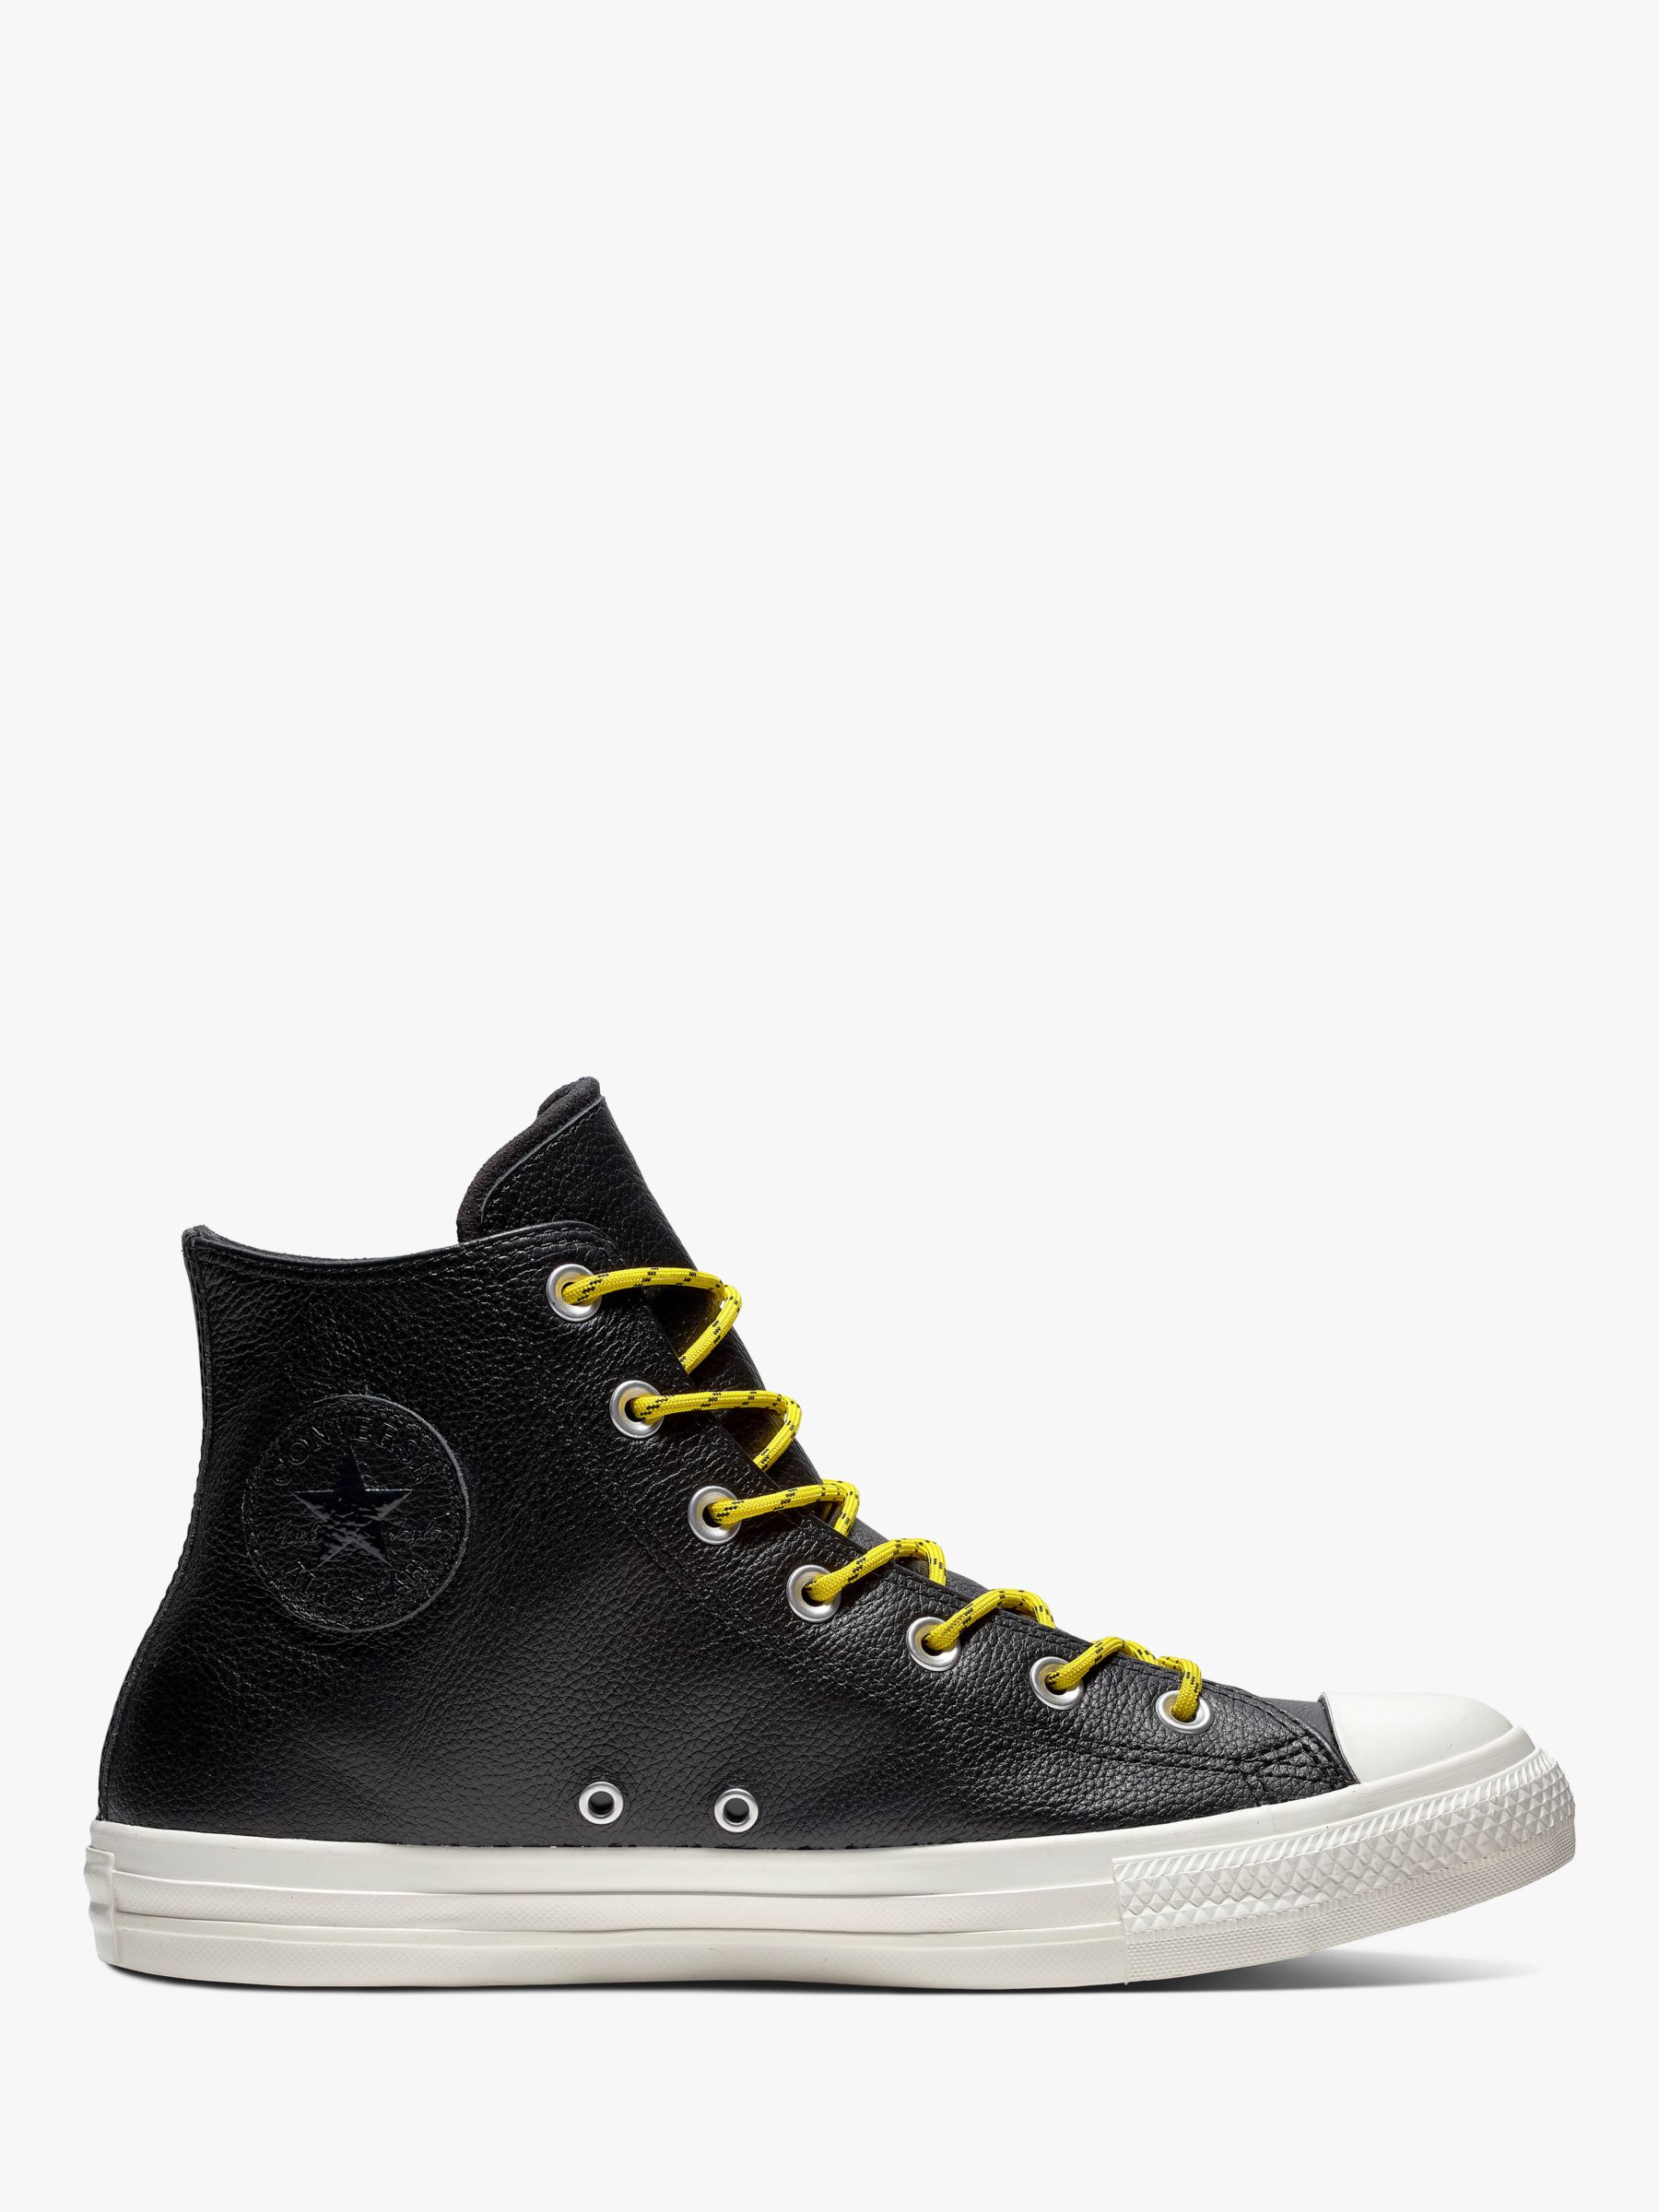 converse chuck taylor leather trainers